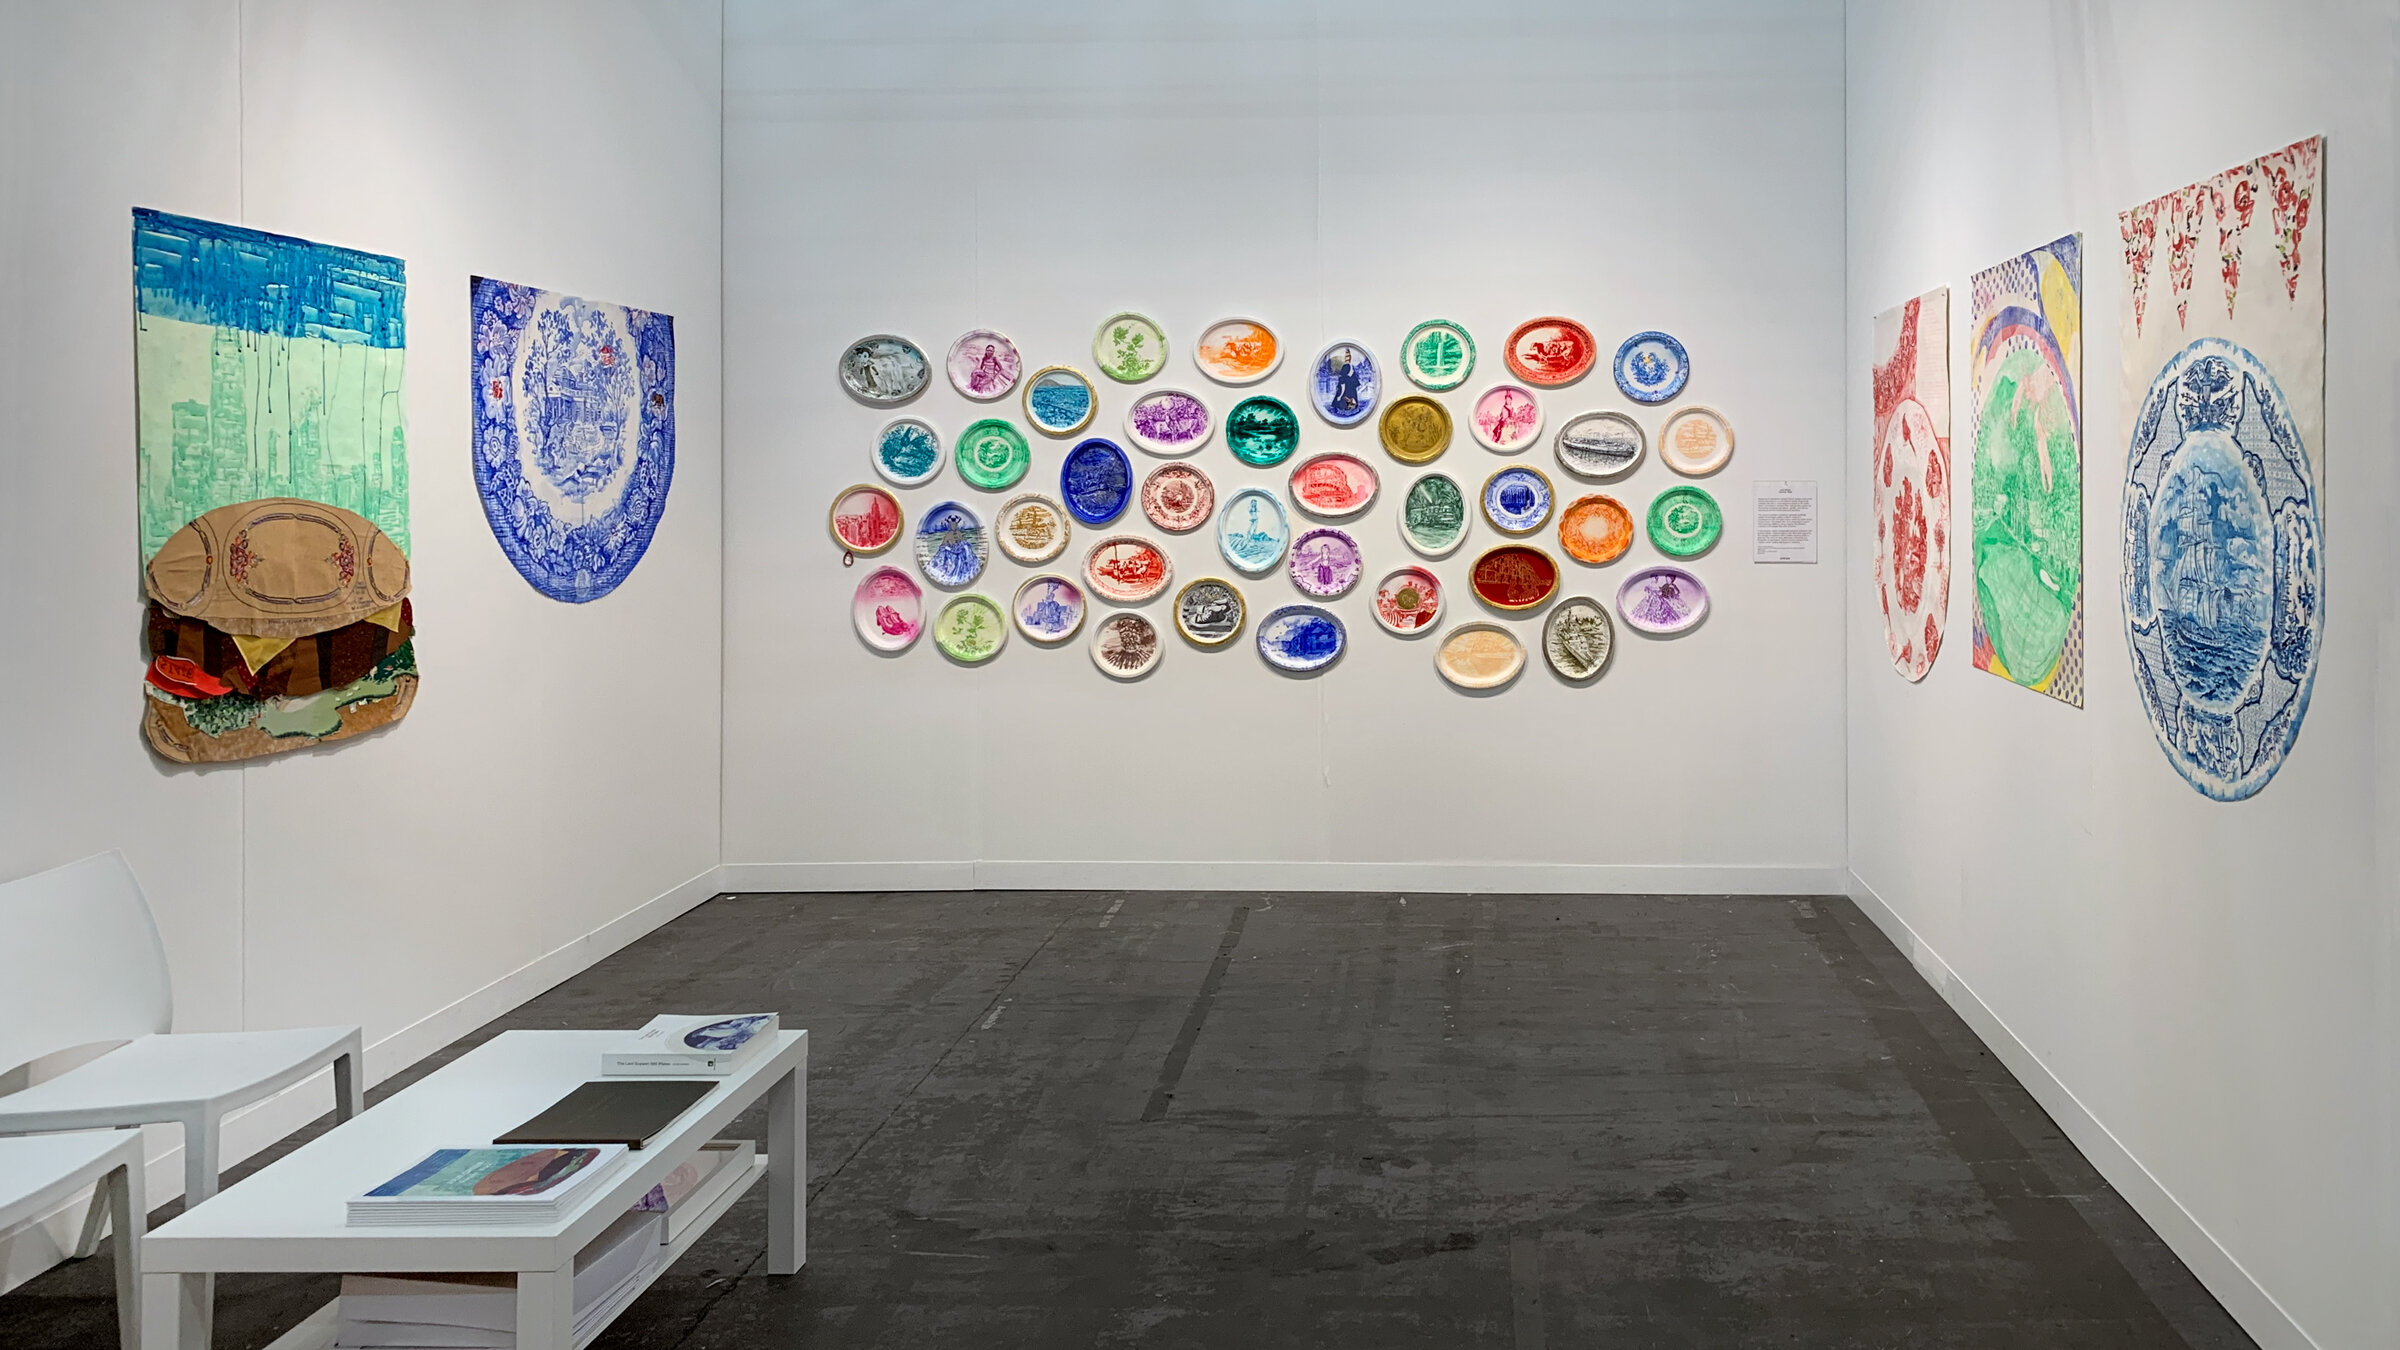  Julie Green’s work at The Armory Show 2020 included five  First Meal  paintings (on opposite walls) and a salon-style presentation of  Fashion Plate  works, painted on Chinet plates and platters. 